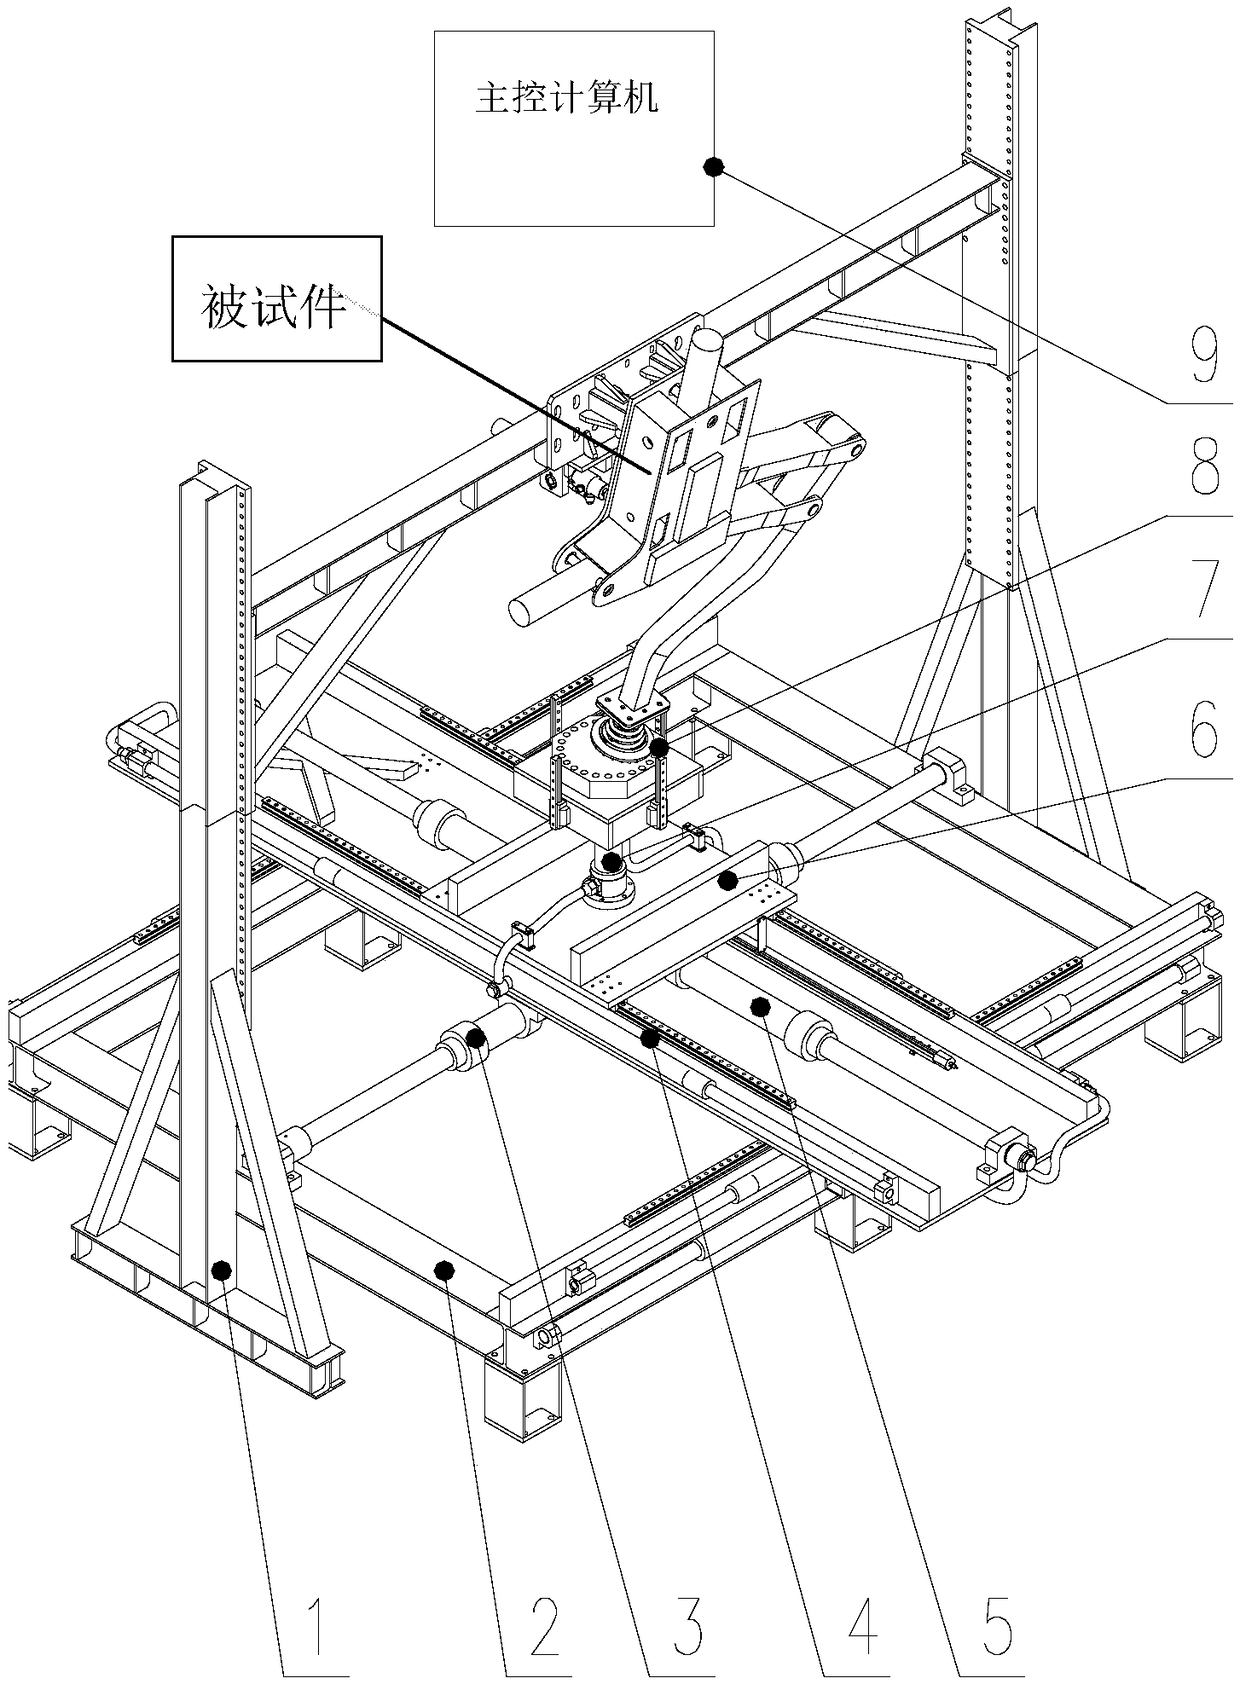 Multi-stage three-degree-of-freedom test bench for single leg of robot foot